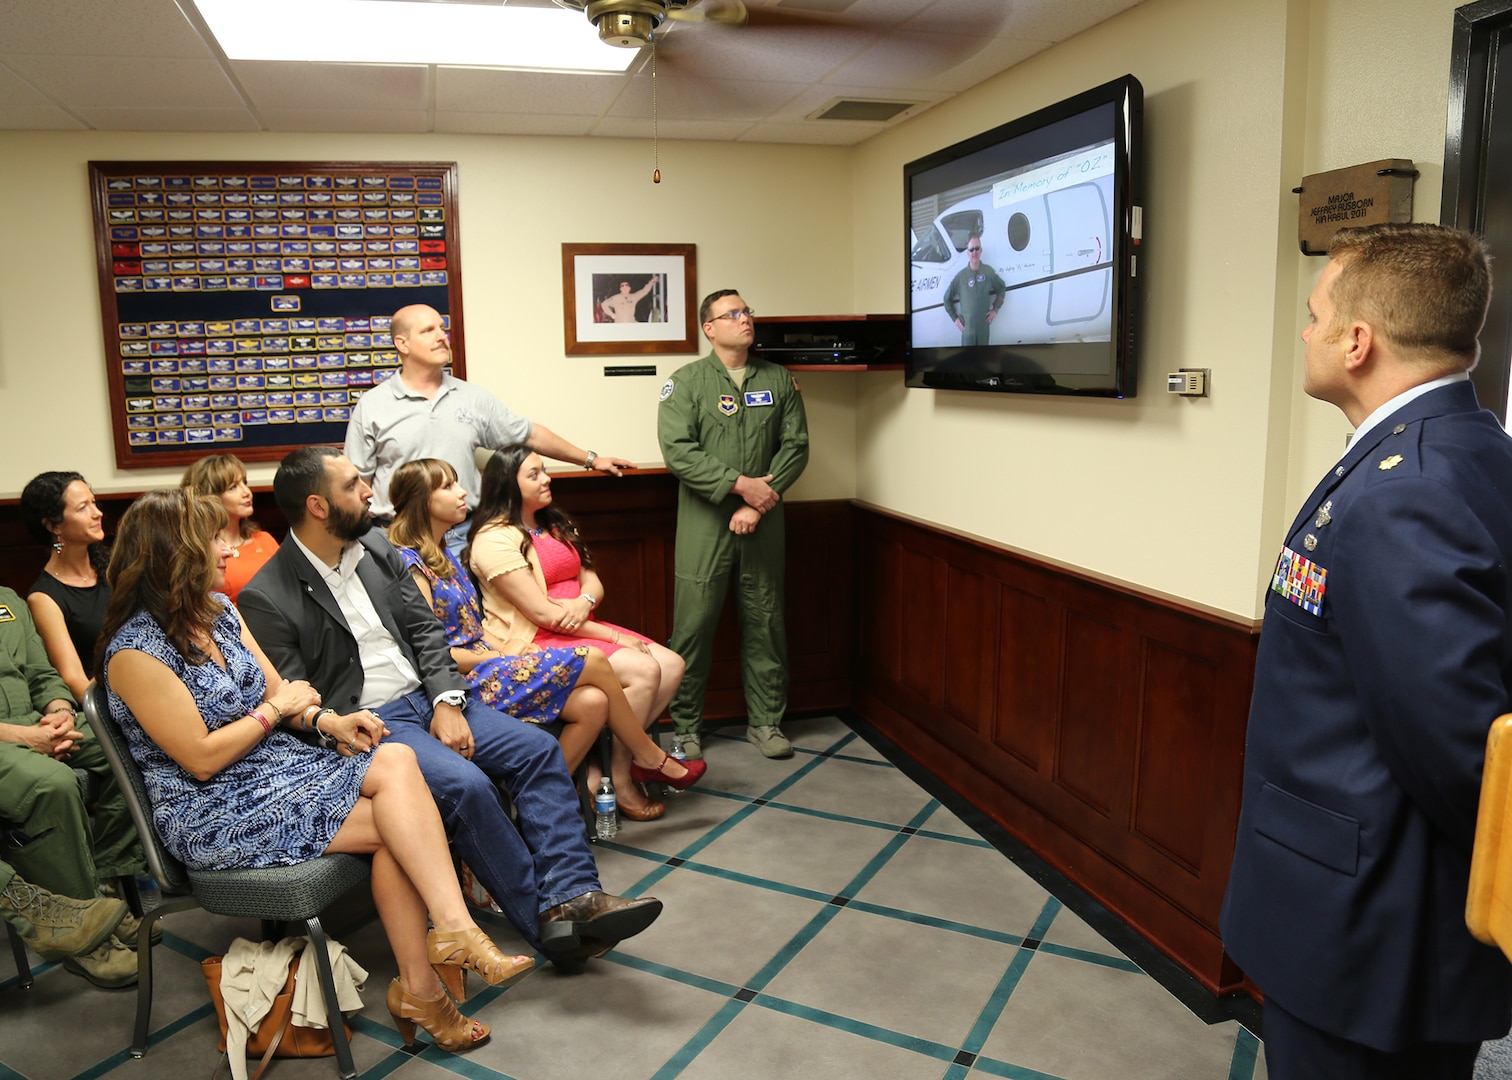 Maj. Jeff Ausborn’s family and friends watch a slide show in the Ausborn Memorial Heritage Room during a dedication ceremony April 18 at the 99th Flying Training Squadron at Joint Base San Antonio-Randolph.  Ausborn was deployed from JBSA-Randolph and killed April 27, 2011, in Kabul, Afghanistan, when a shooter opened fire at the Kabul International Airport killing eight Airmen and one American contractor. (U.S. Air Force photo by Melissa Peterson)